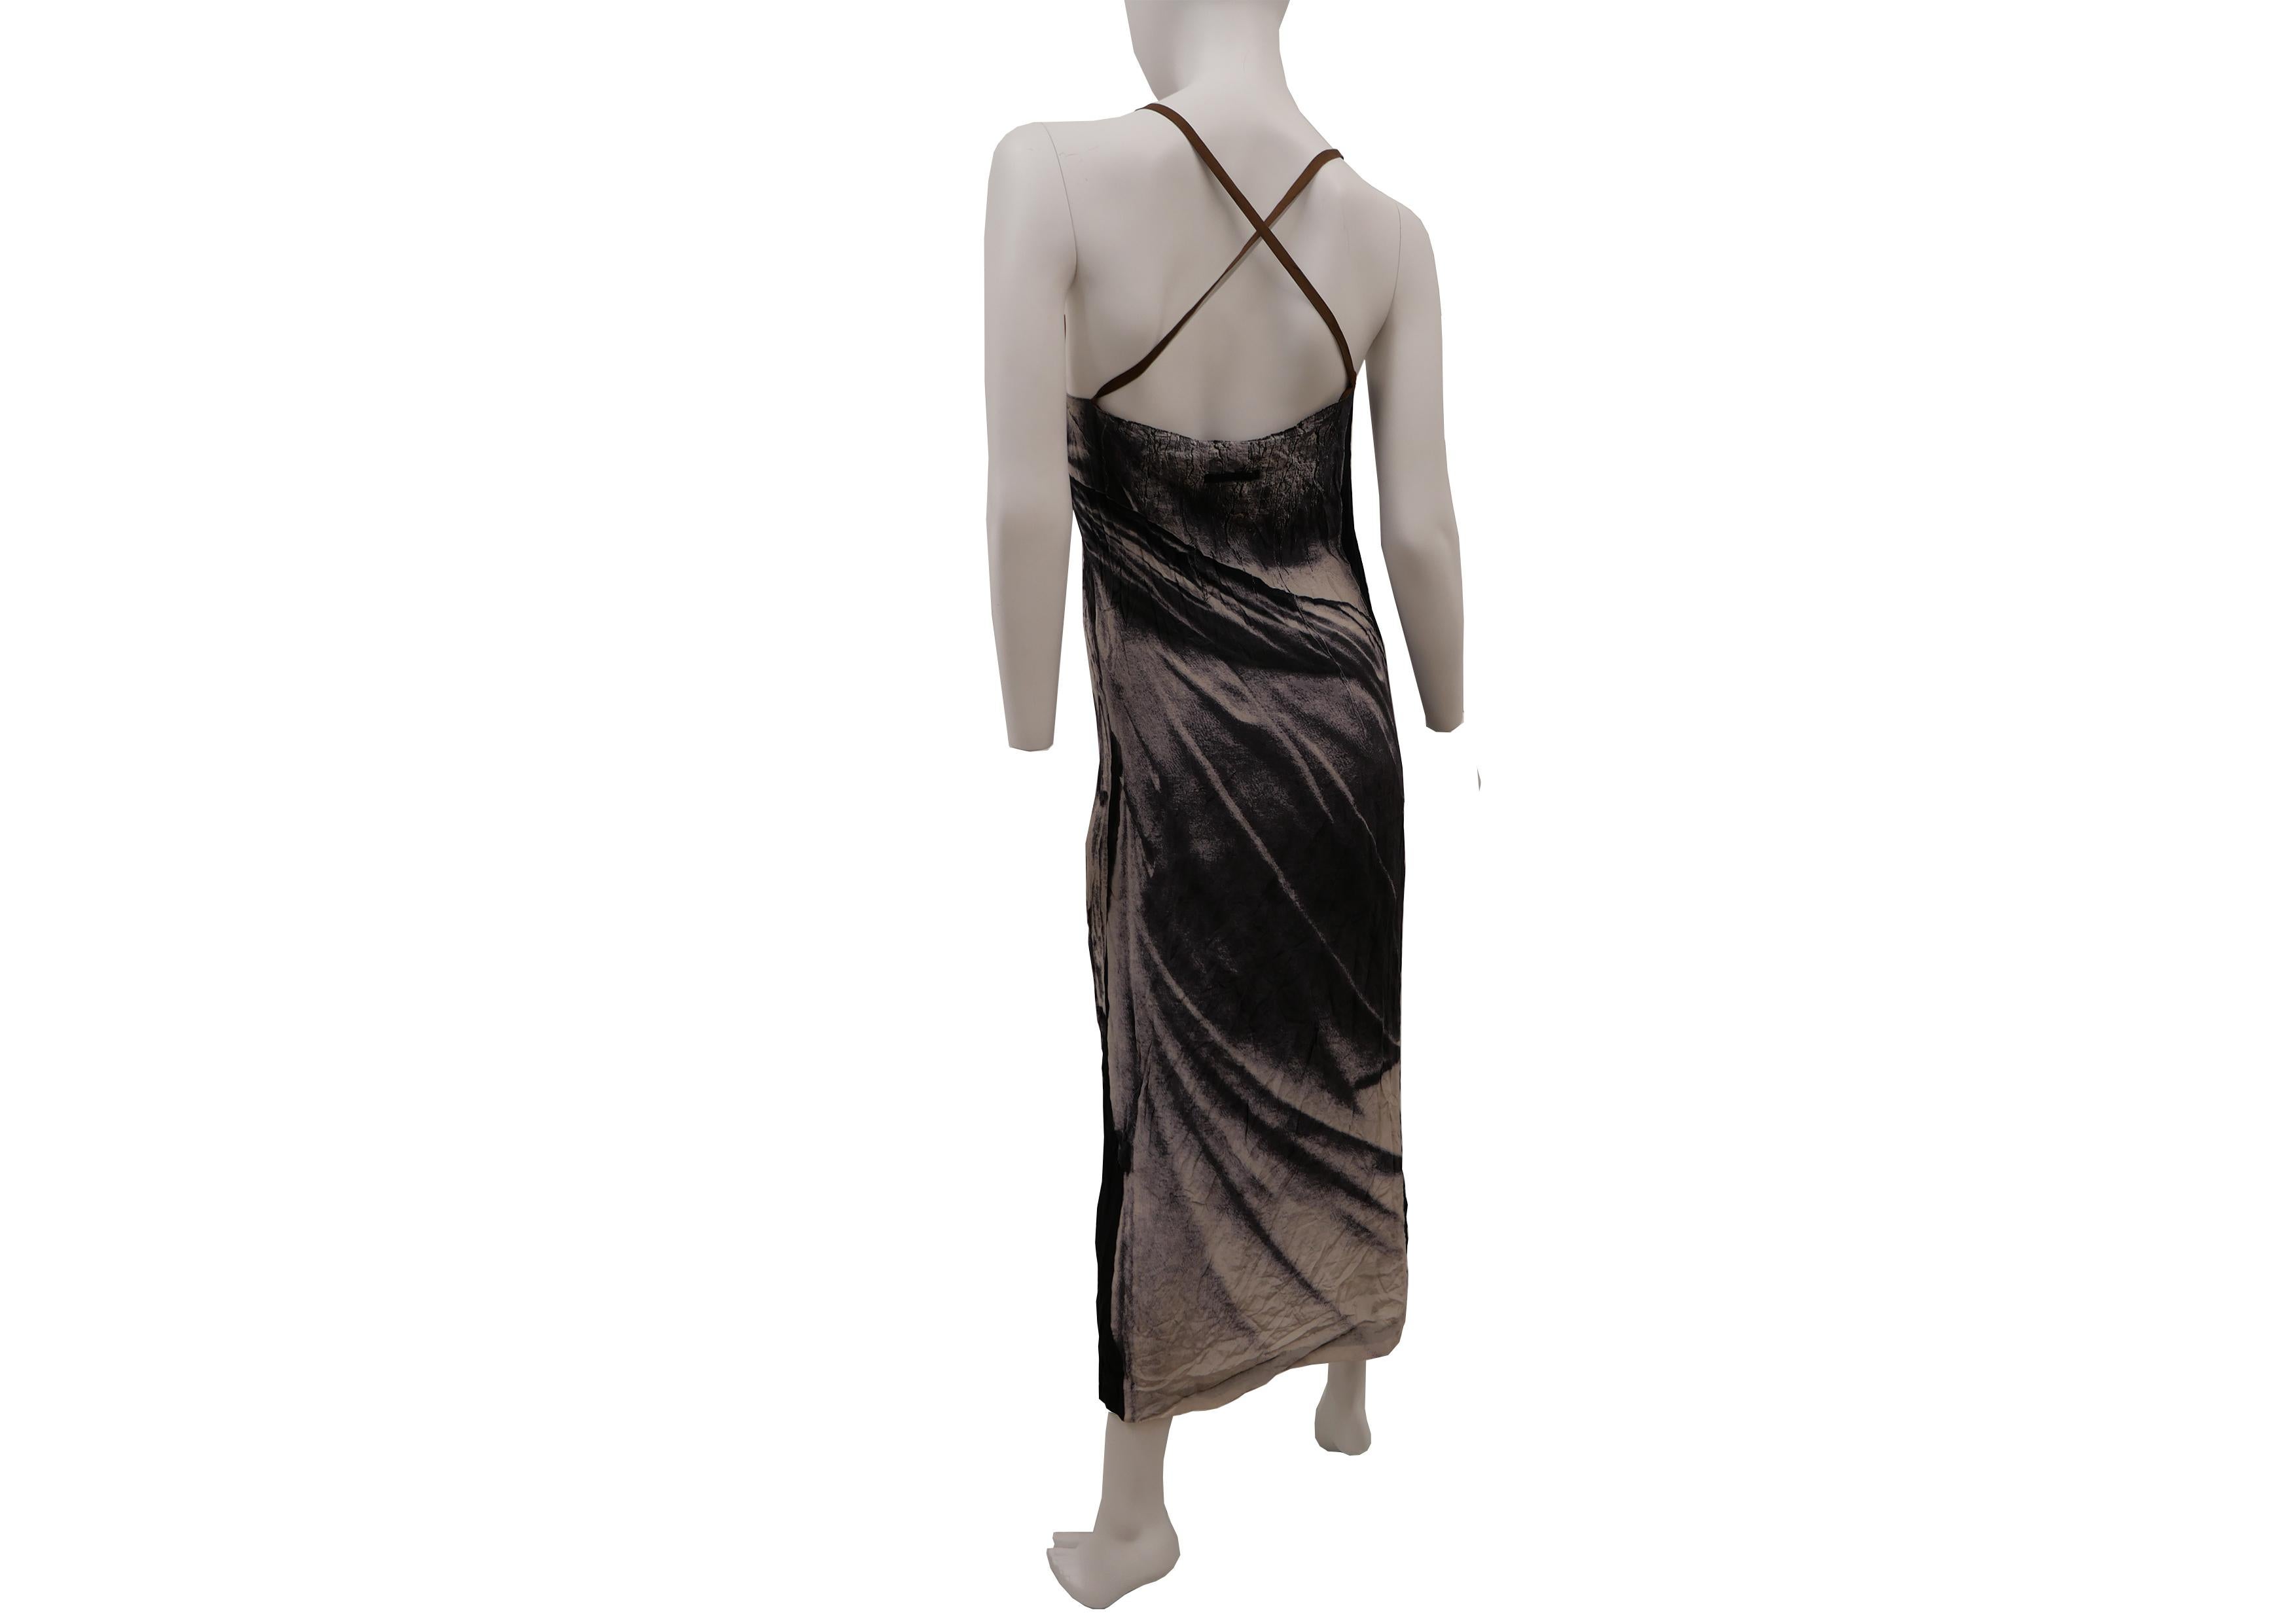 Jean Paul Gaultier Dress Spring/Summer 1999
'The figure of a Hellenic statue wearing a draped cloth features both on the front as well as on the backside of this spring/summer 1996 dress by Jean Paul Gaultier. The trompe l'oeil effect of